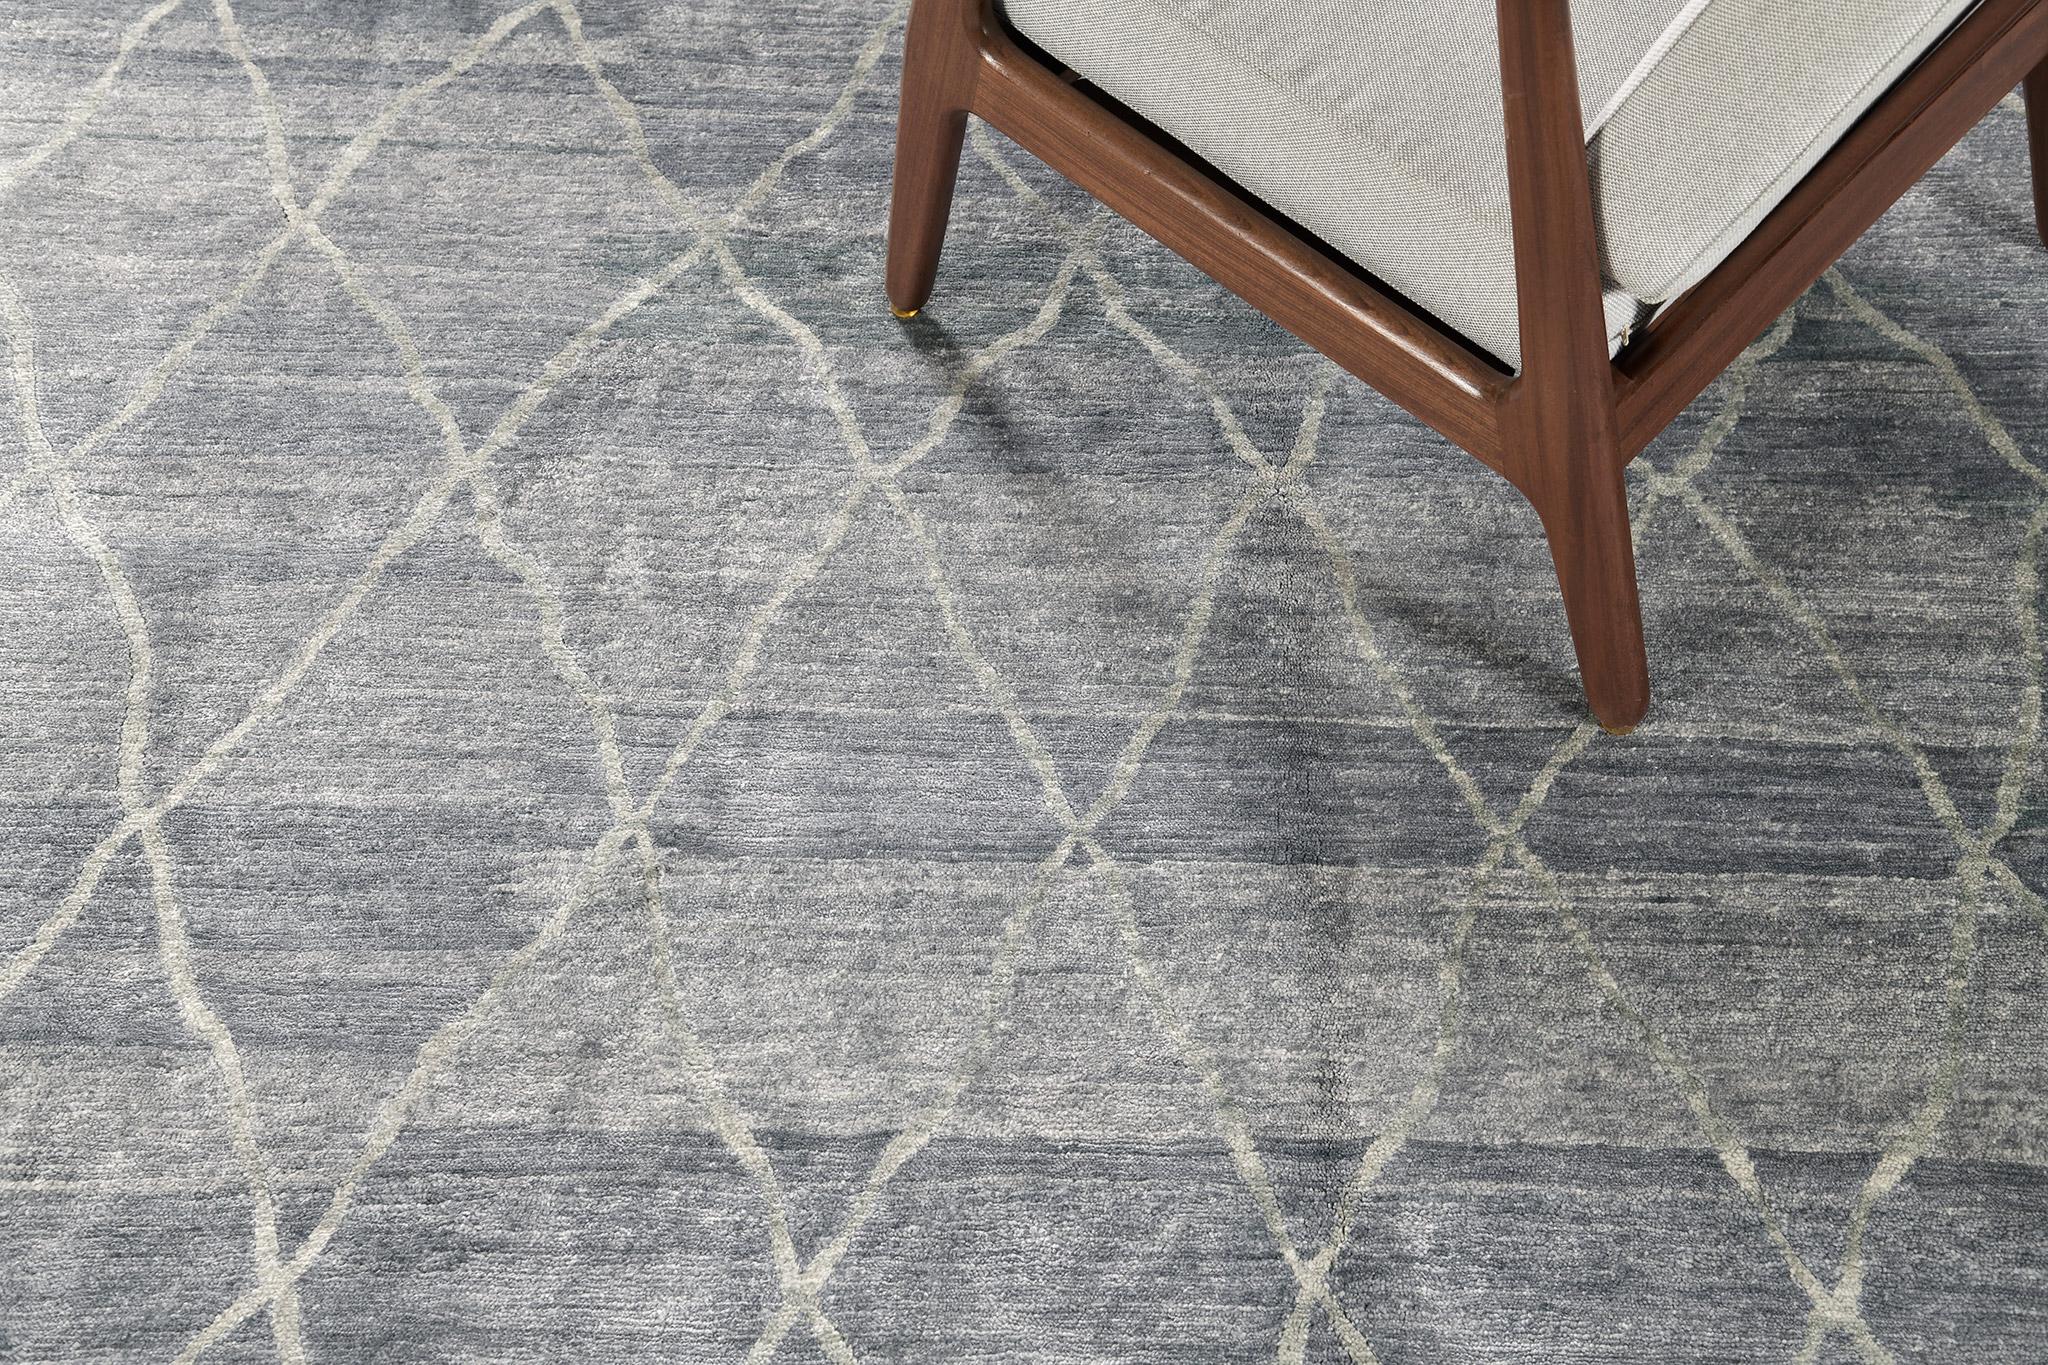 Palisade is elegant bamboo silk that features a white crisscross patterned rug in variegated tones of earth tones. It brings your home pristine and gorgeous interiors. Elan collections are a must-have on your list when it comes to stylish and